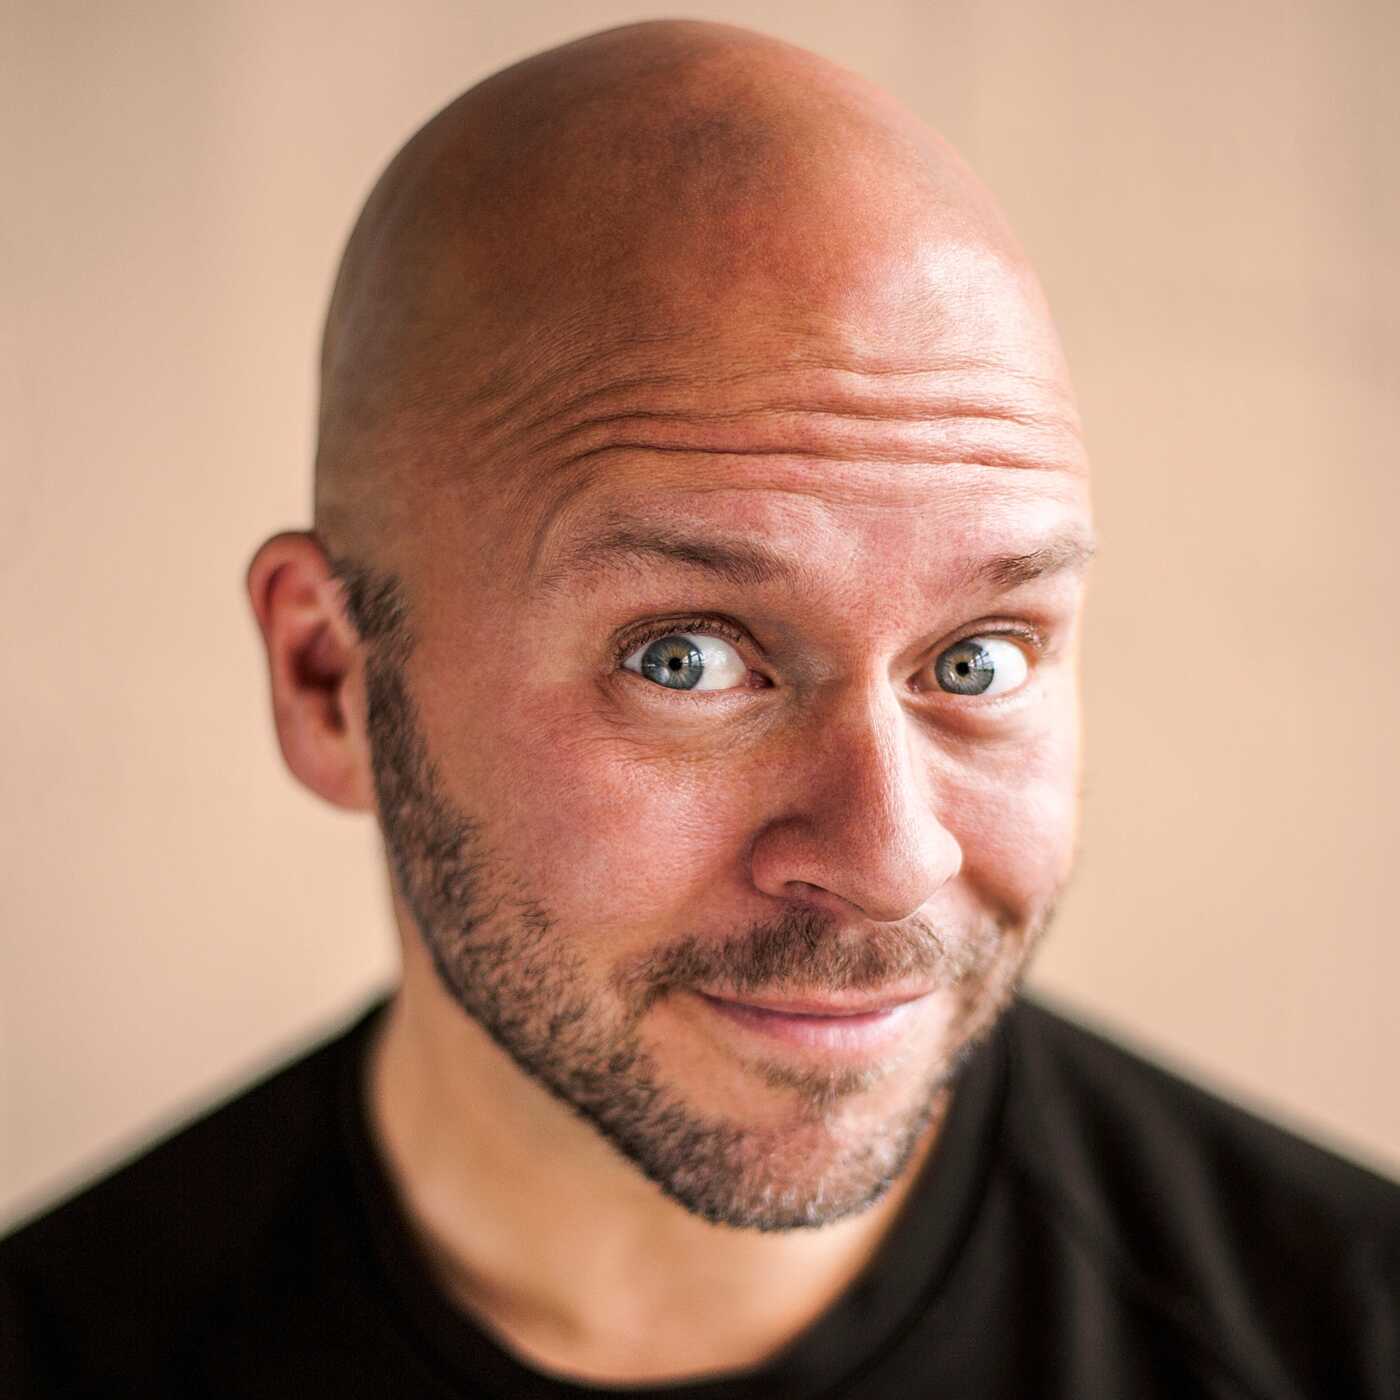 Derek Sivers' Son Won the Happiness Lottery